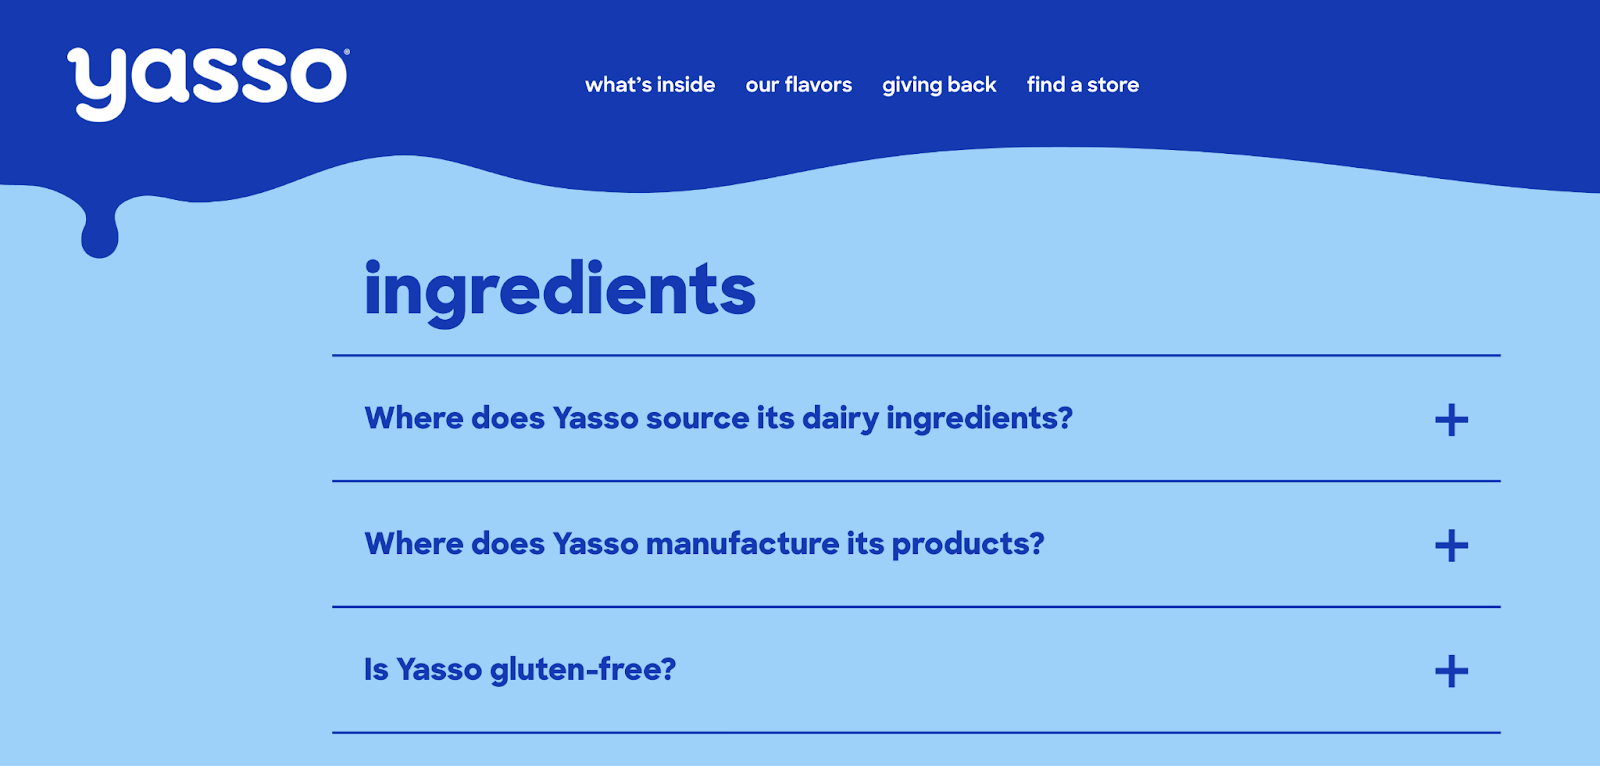 y،o drop down menu reveals answers to questions about ingredients